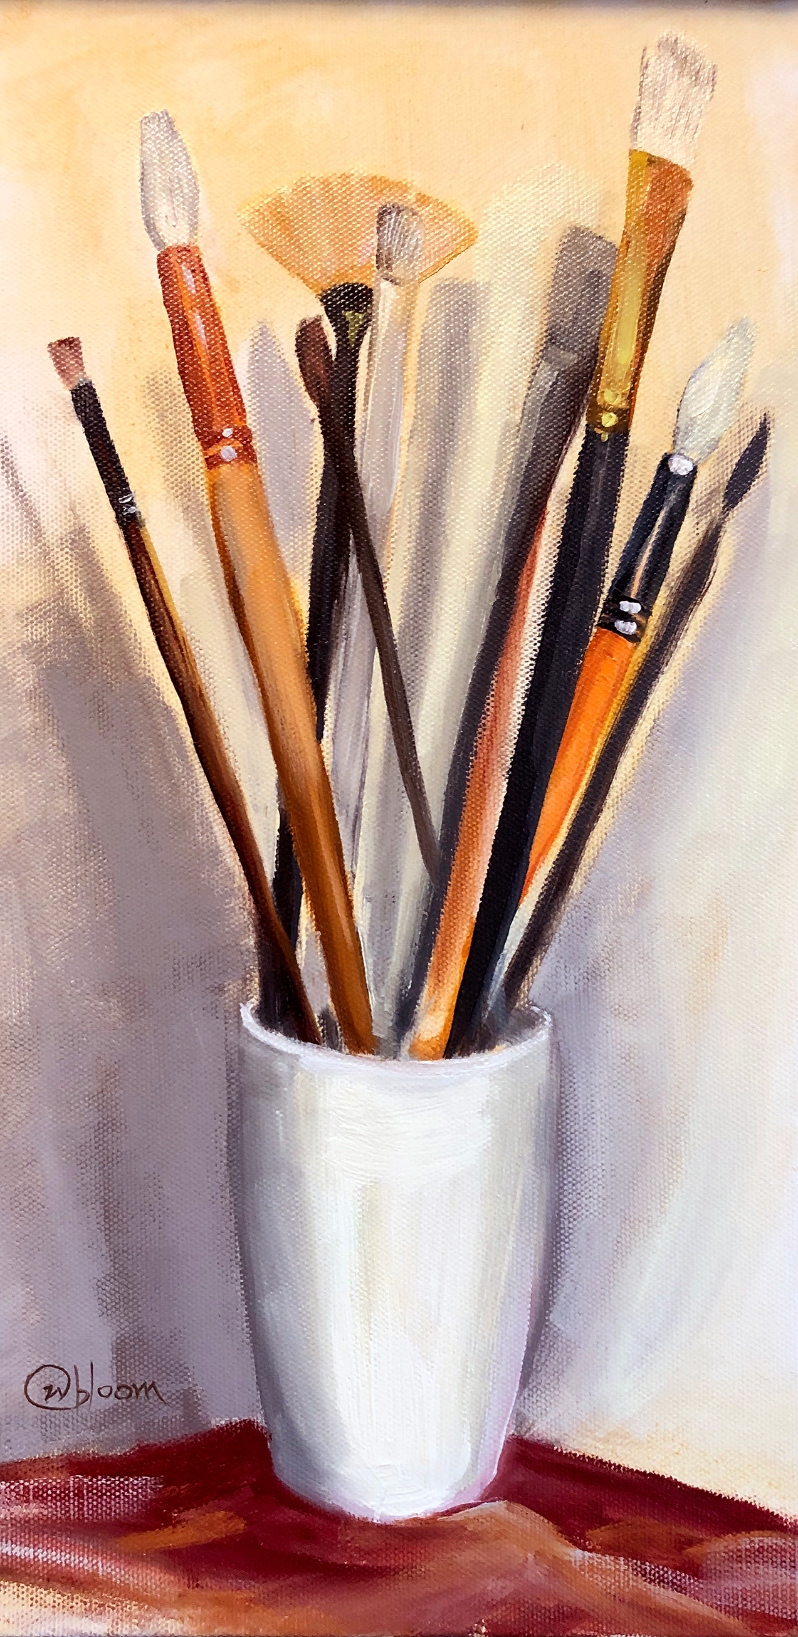 Bloom, Carolyn: Just Brushes